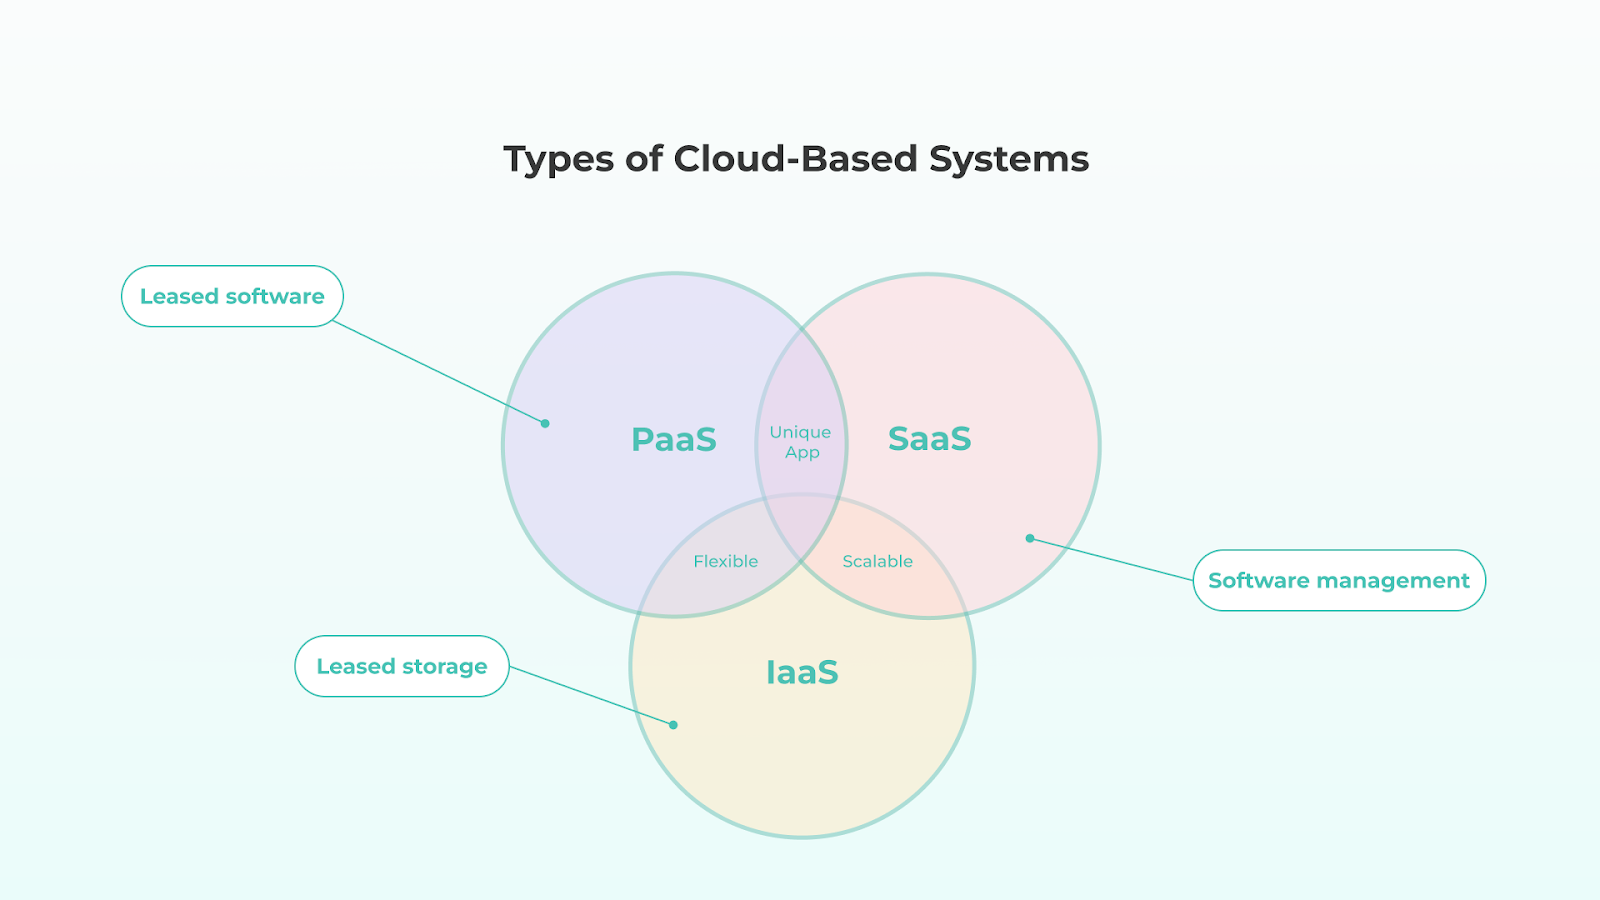 Types of Cloud-Based Systems